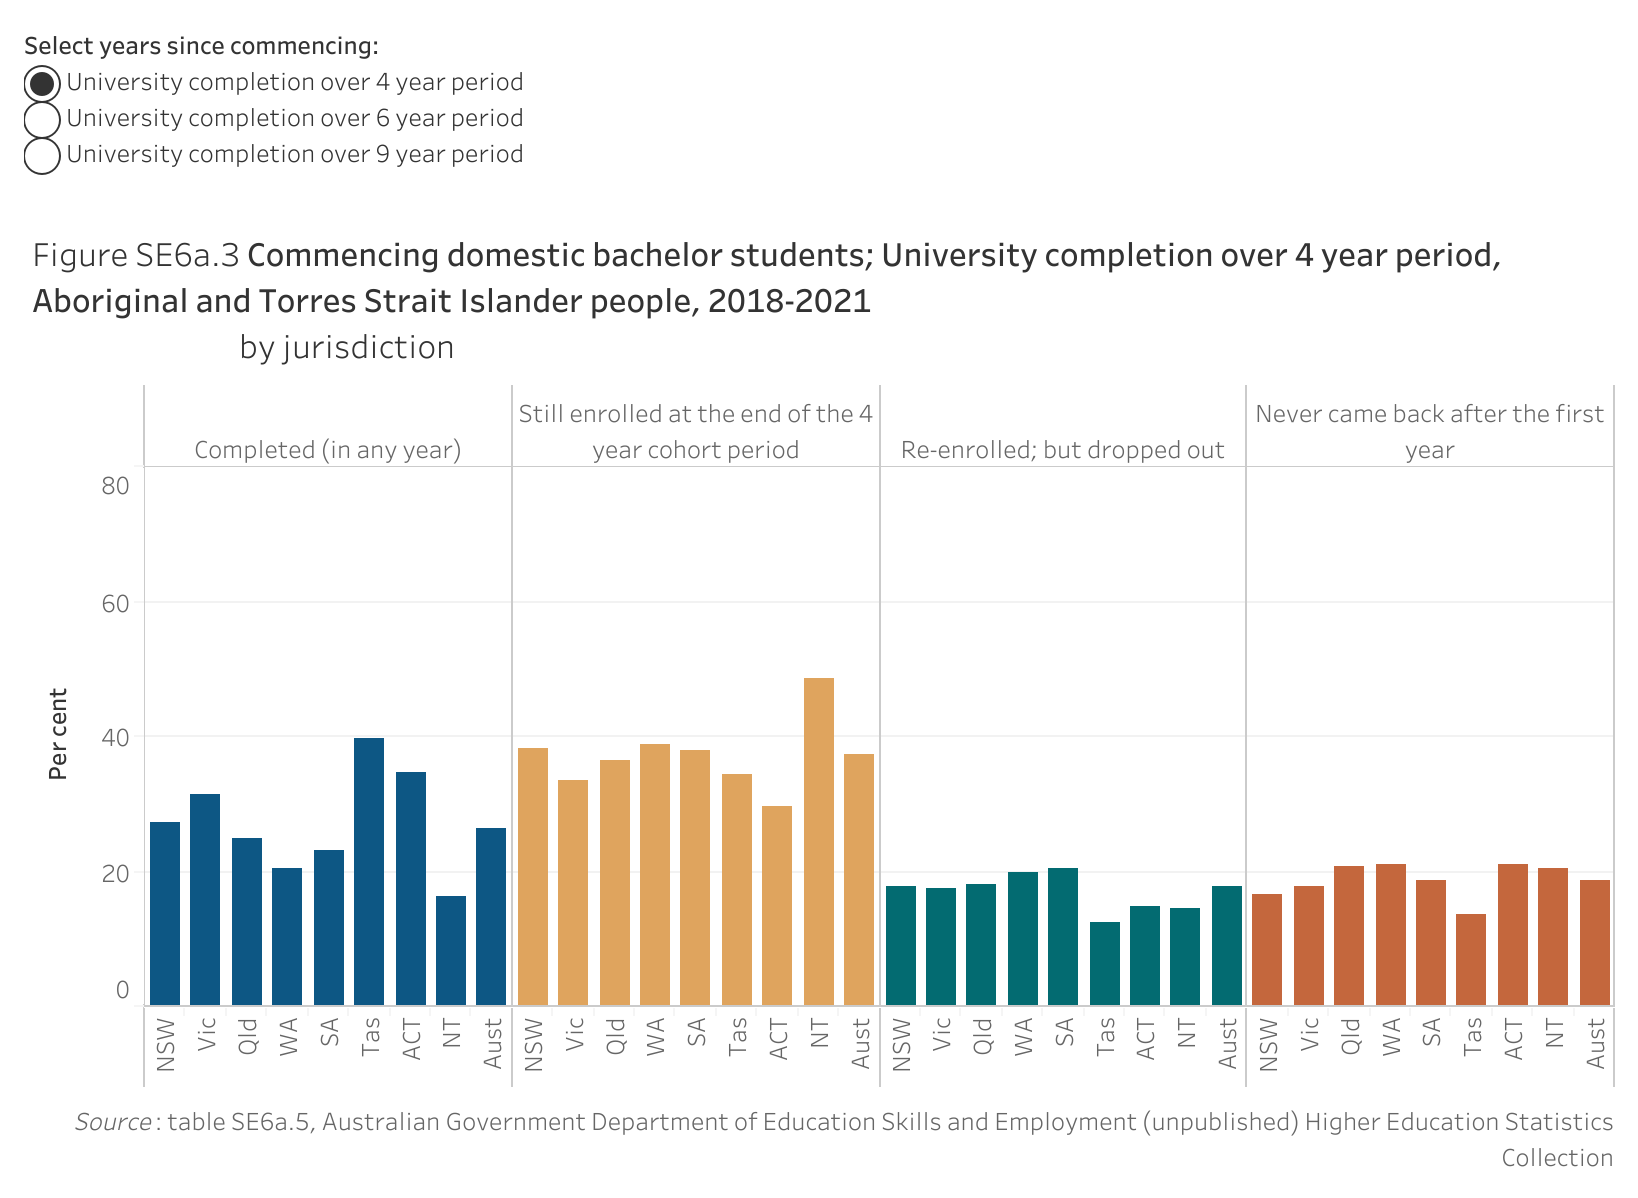 Figure SE6a.3 shows the commencing domestic bachelor students; University completion over 4 year period, Aboriginal and Torres Strait Islander people, 2018-2021, by jurisdiction . More details can be found within the text near this image.